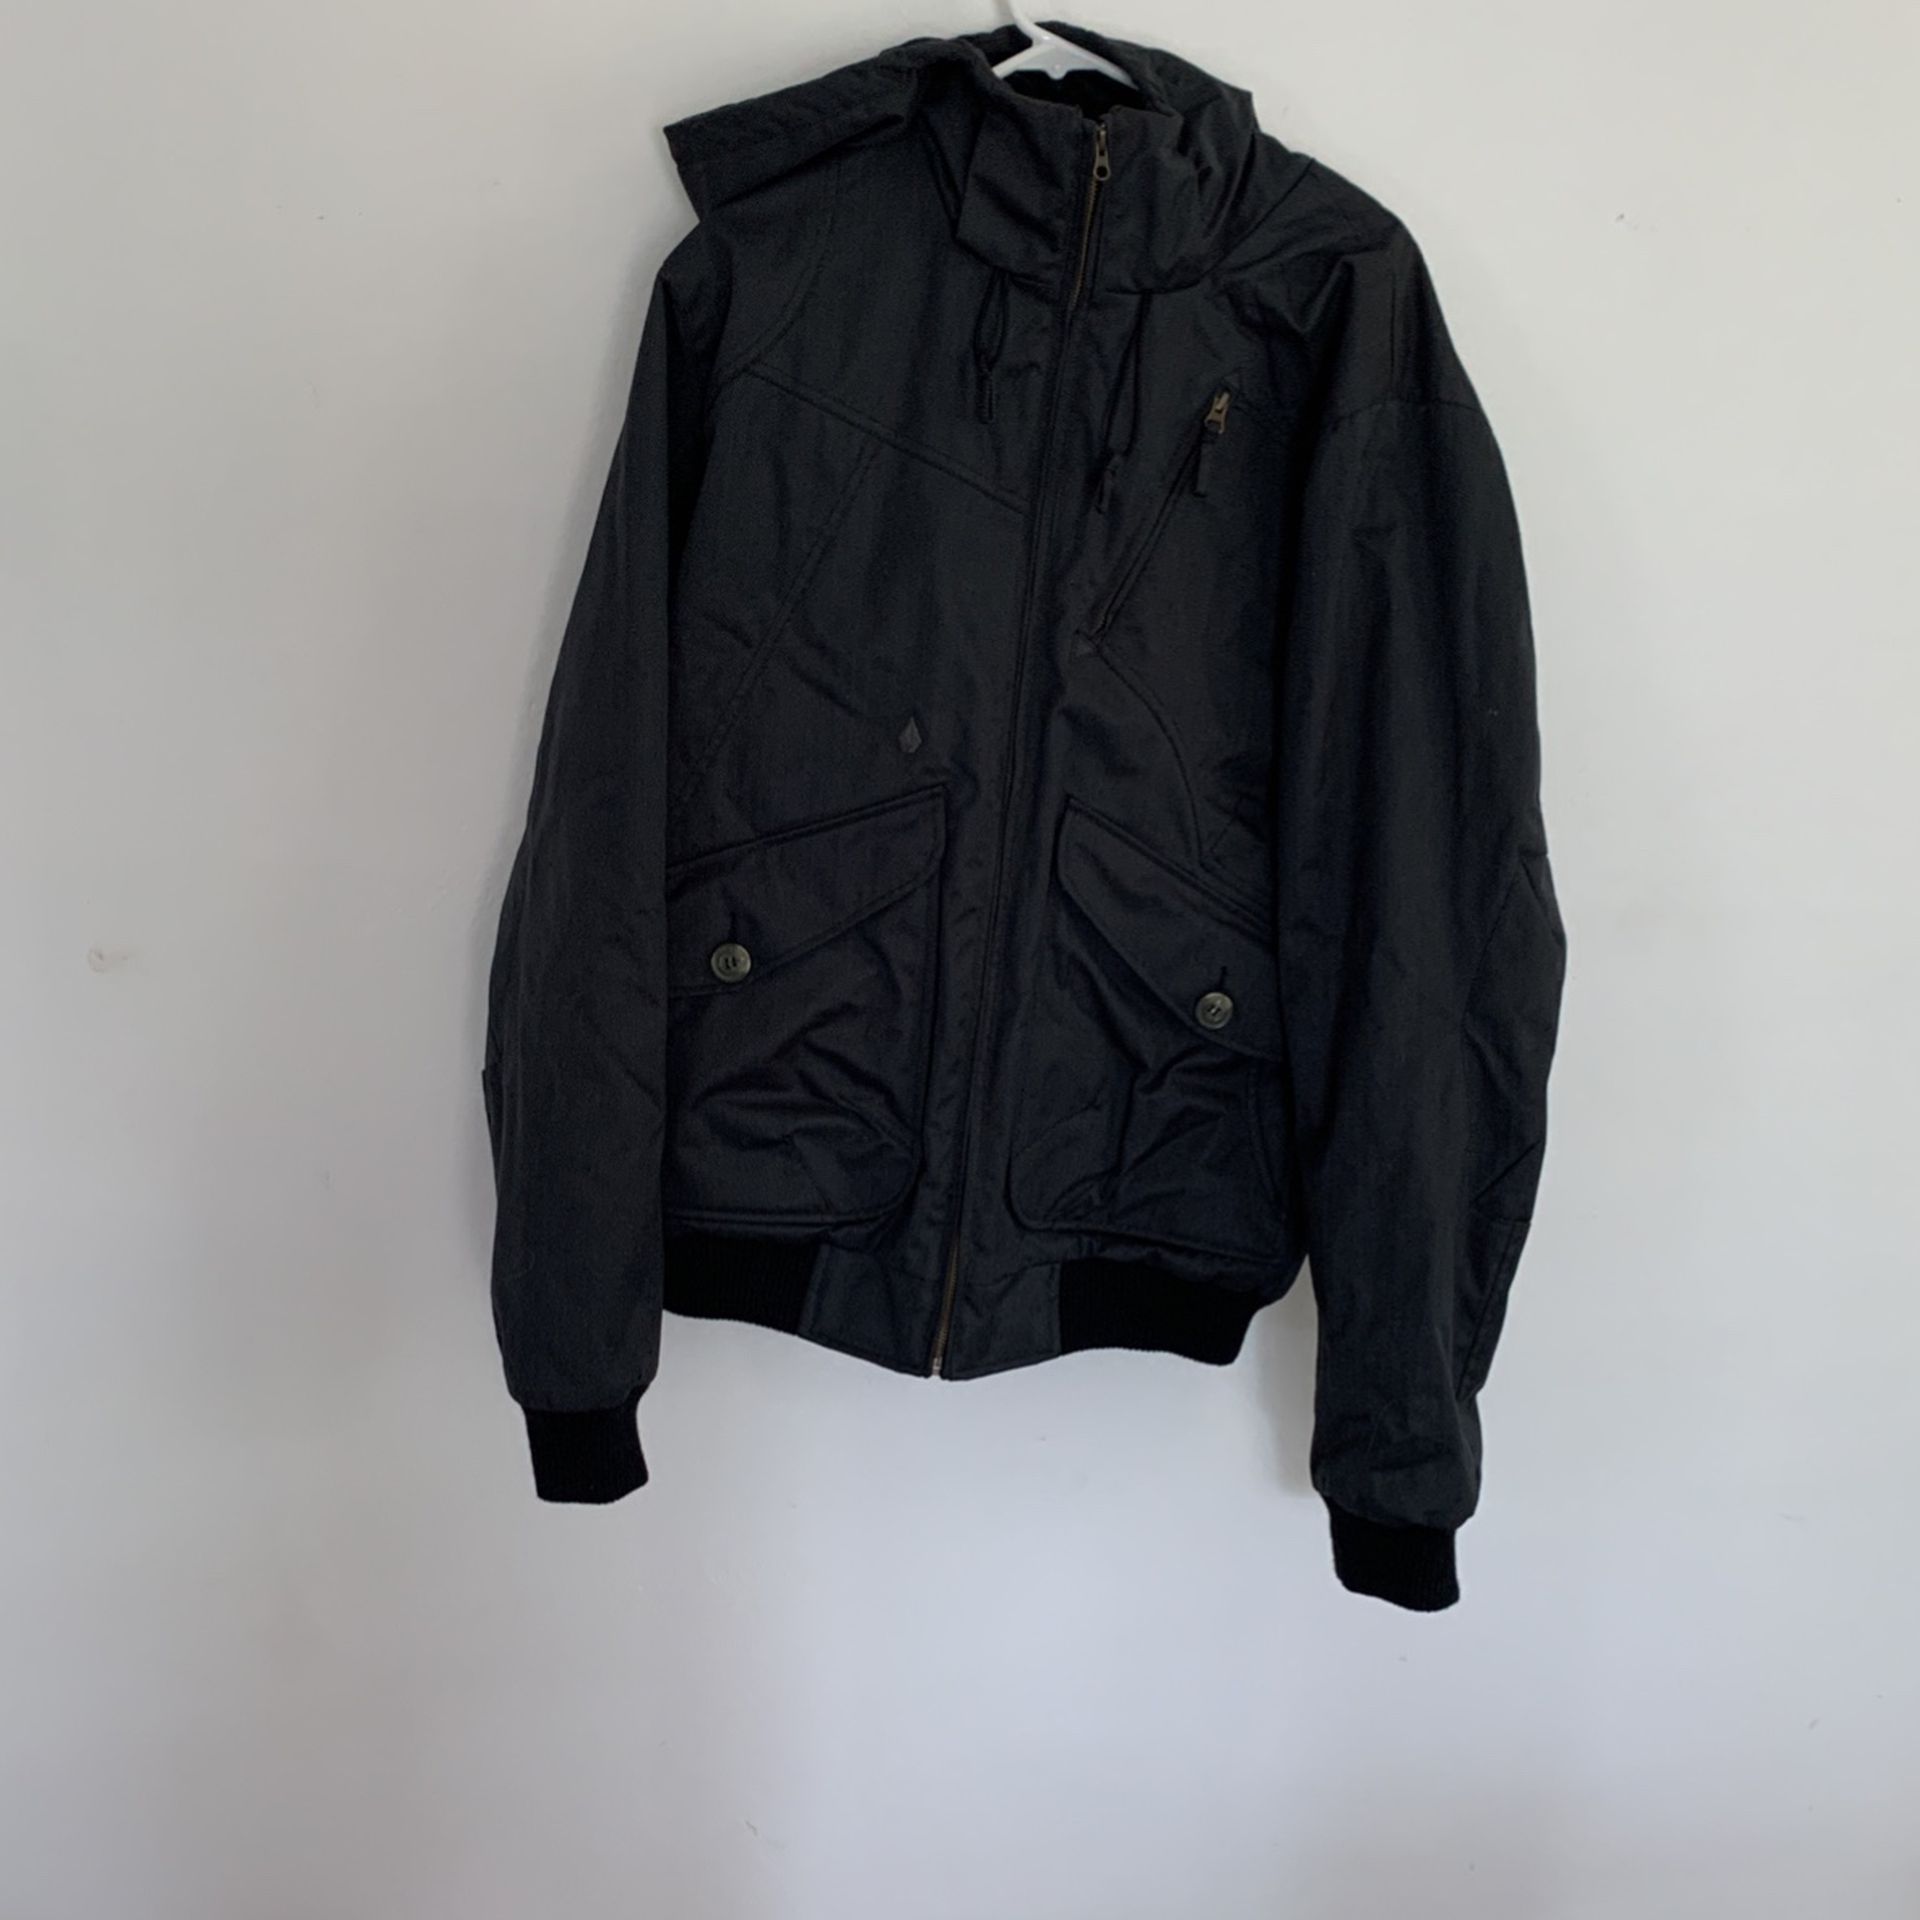 Volcom Scout Winter - Snowboard Jacket for Sale in Carlsbad, CA - OfferUp